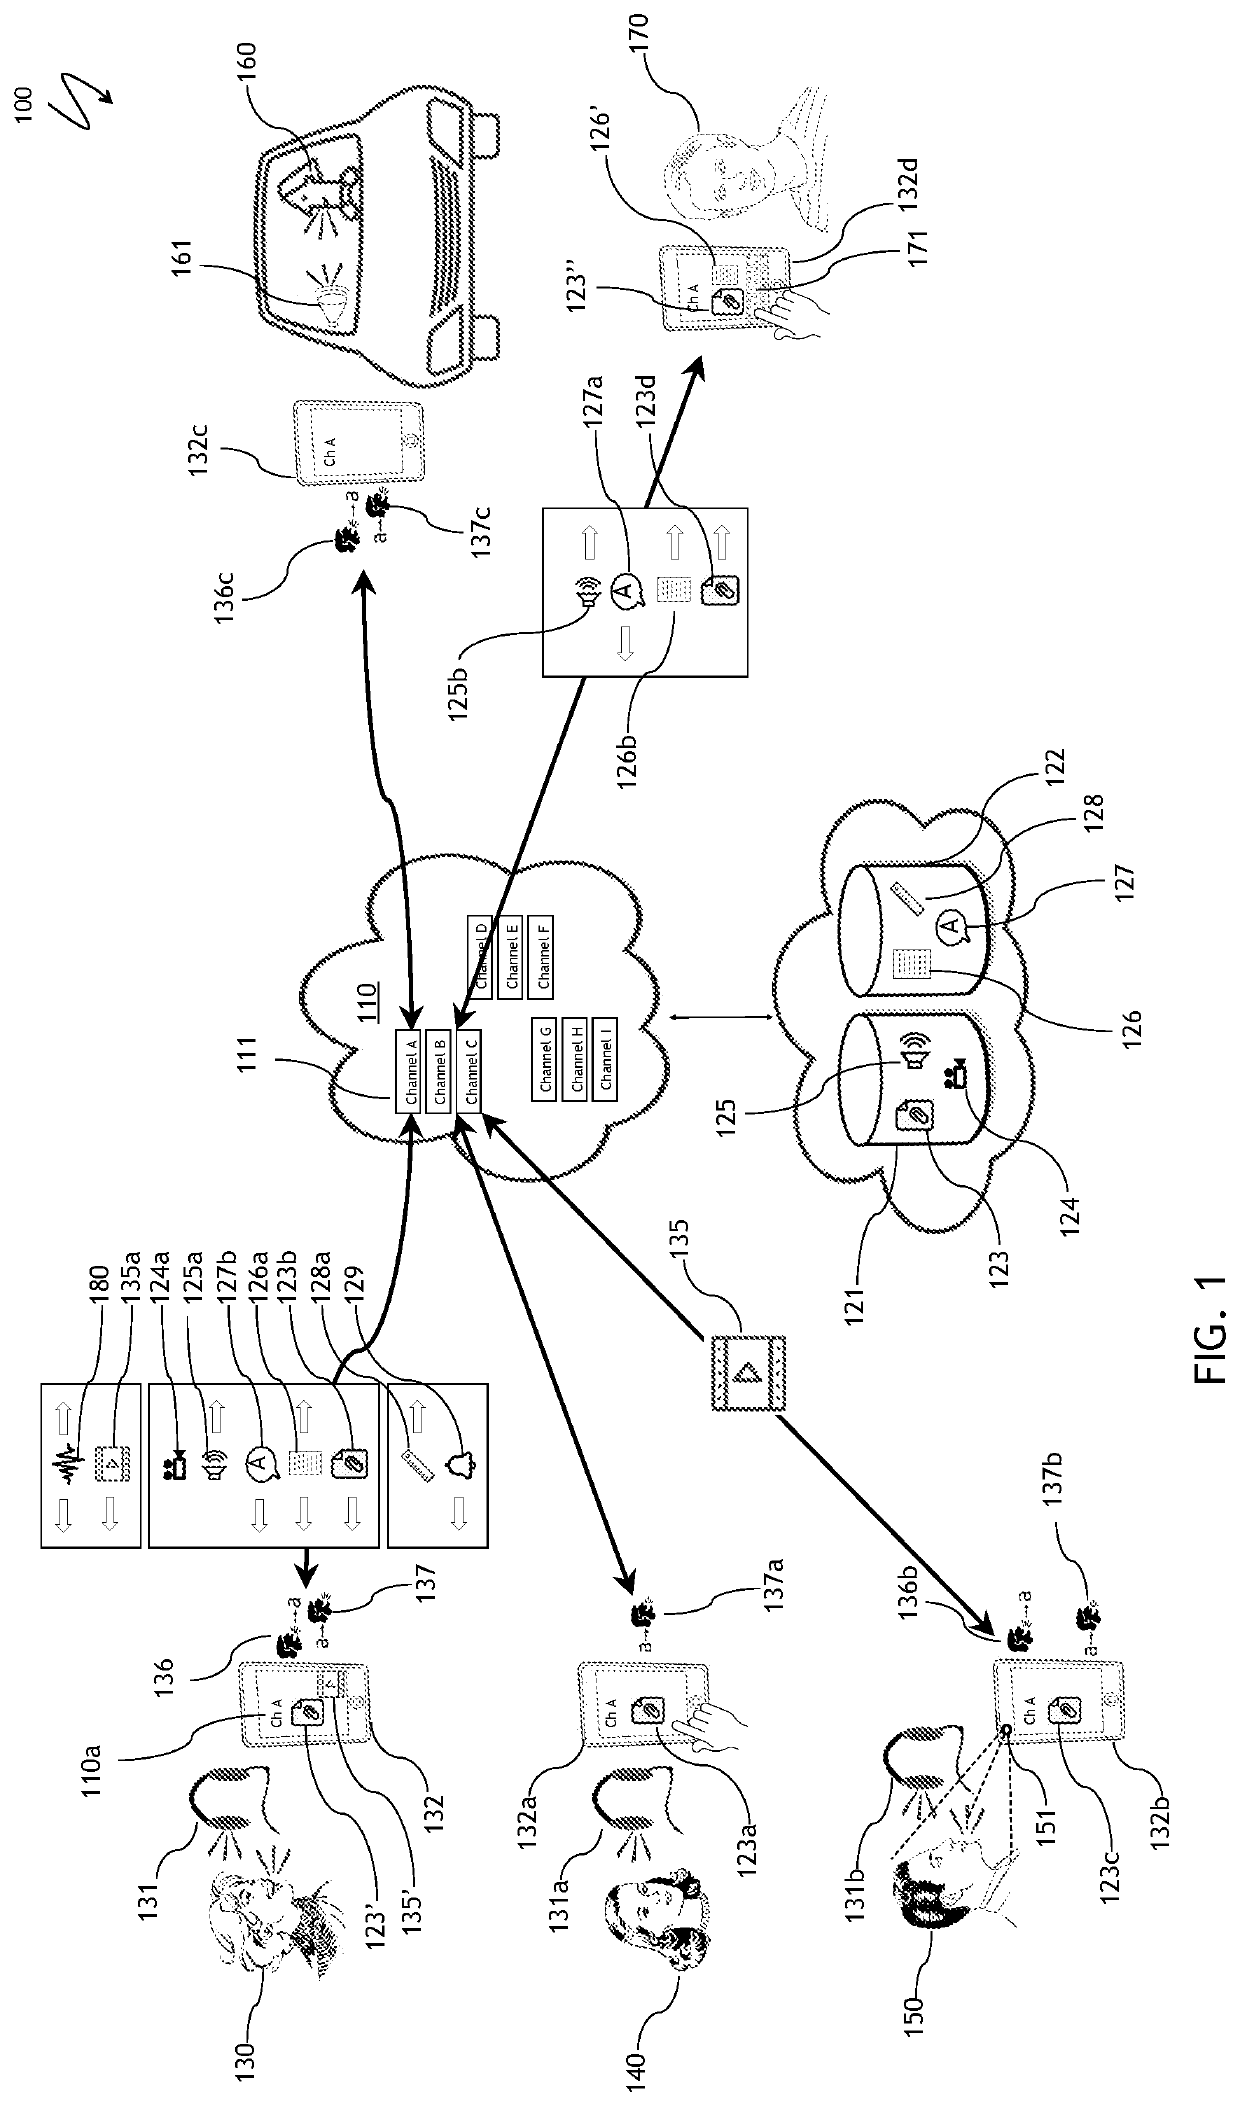 Continuous multimodal communication and recording system with automatic transmutation of audio and textual content